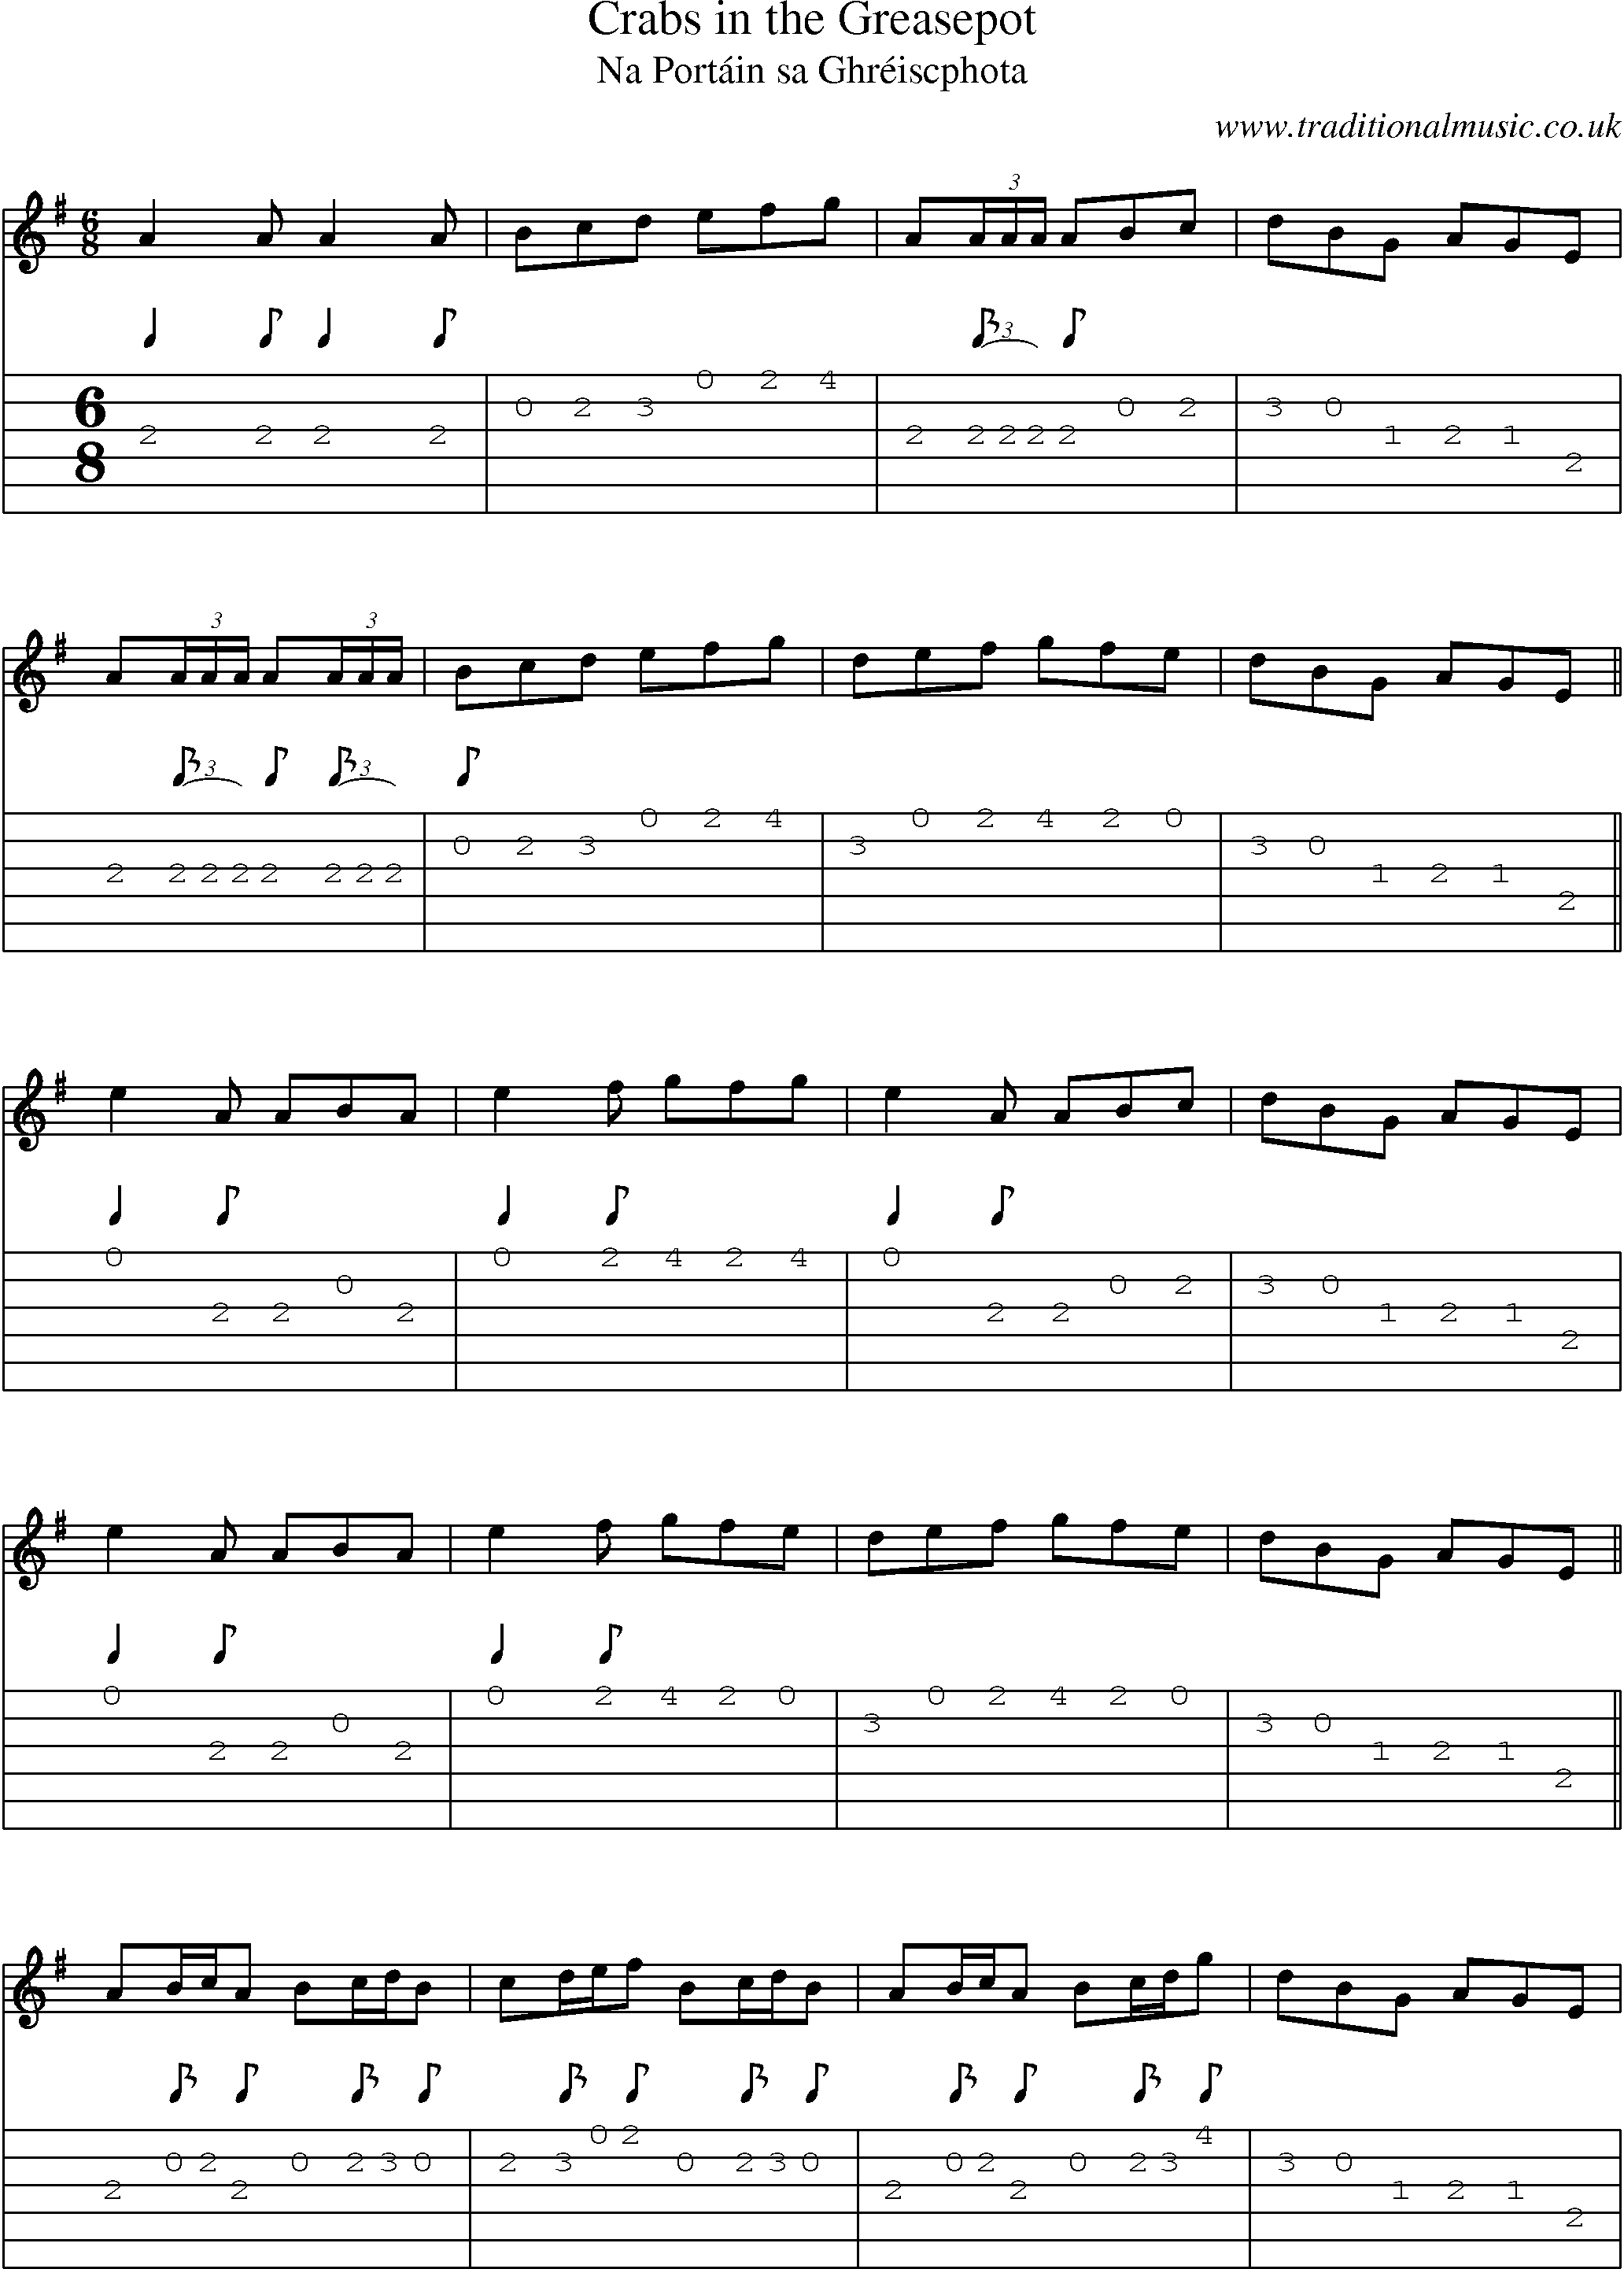 Music Score and Guitar Tabs for Crabs In Greasepot